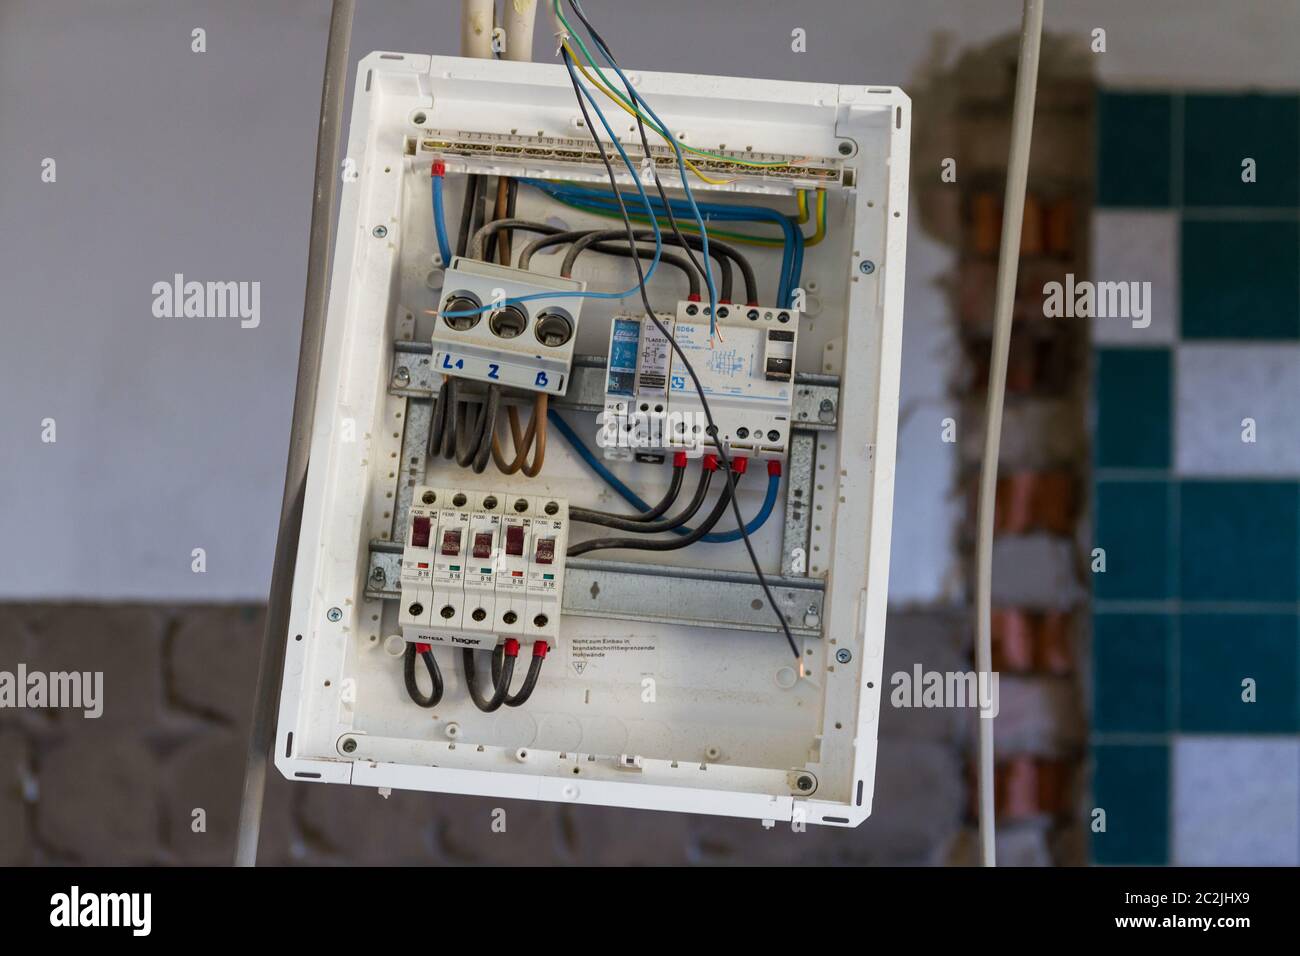 faulty installation electrical system switch box Stock Photo